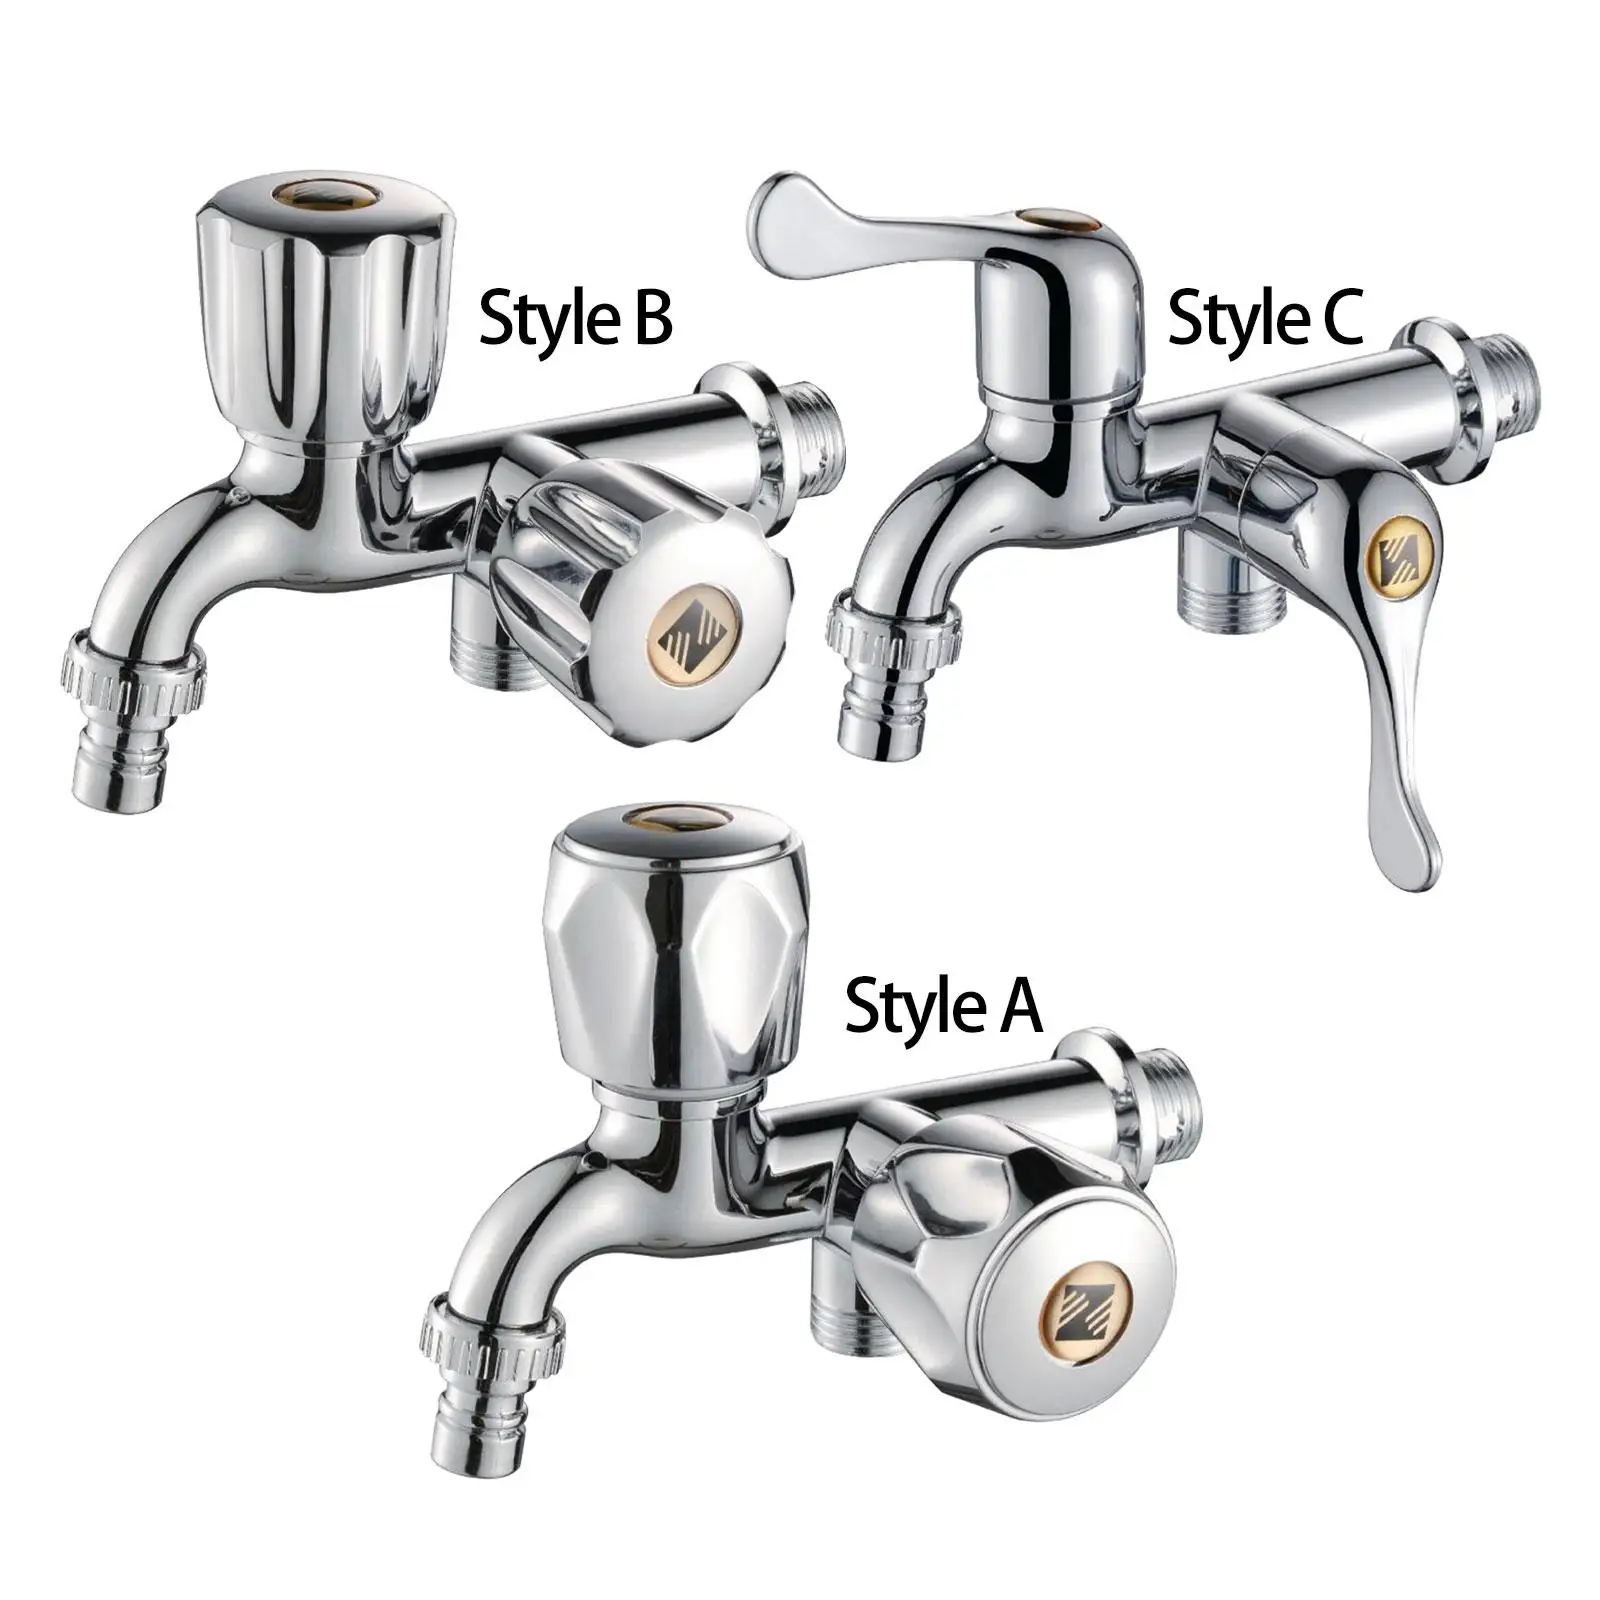 Water Faucet for Washing Machine Wall Mounted Double Spout Double Switch G1/2 Water Tap Faucet for Pool Bathroom Laundry Room